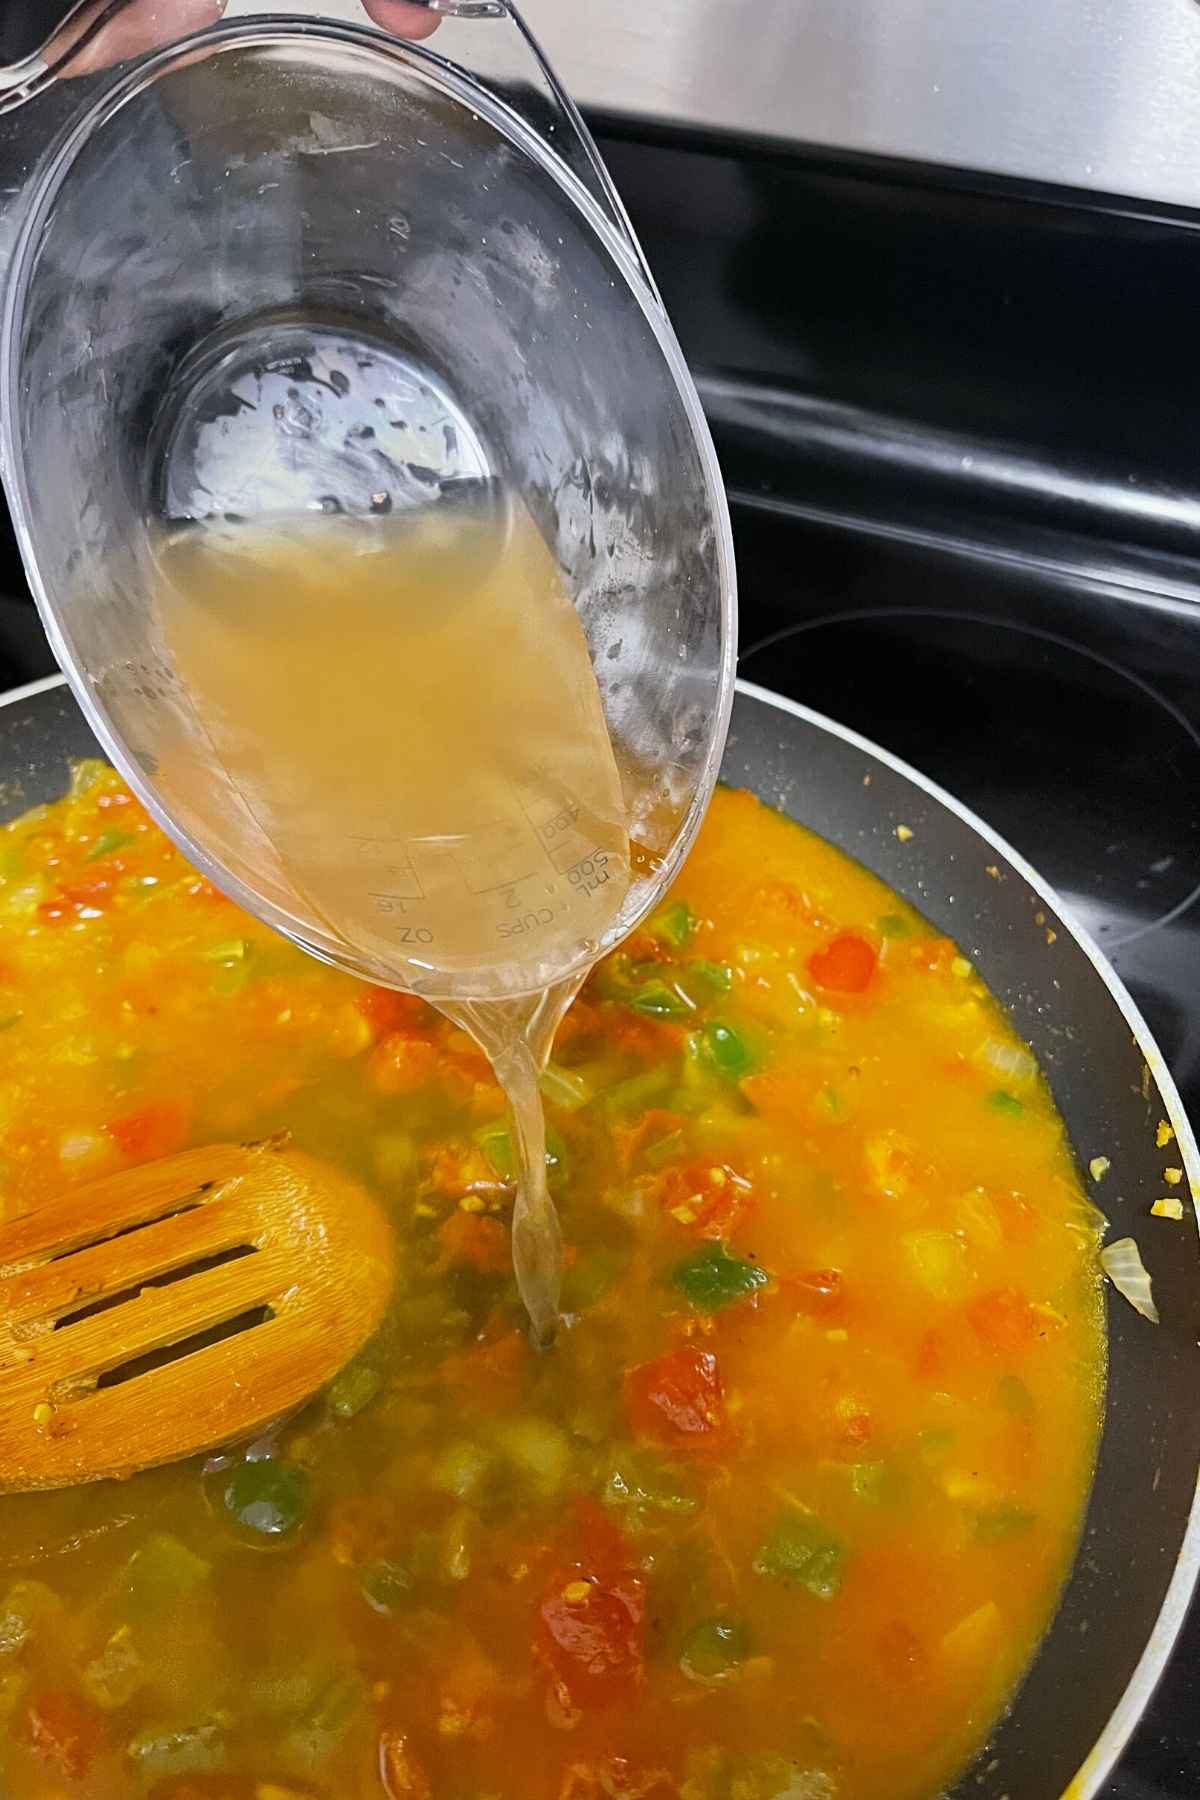 Pouring chicken broth into the cooked vegetables.